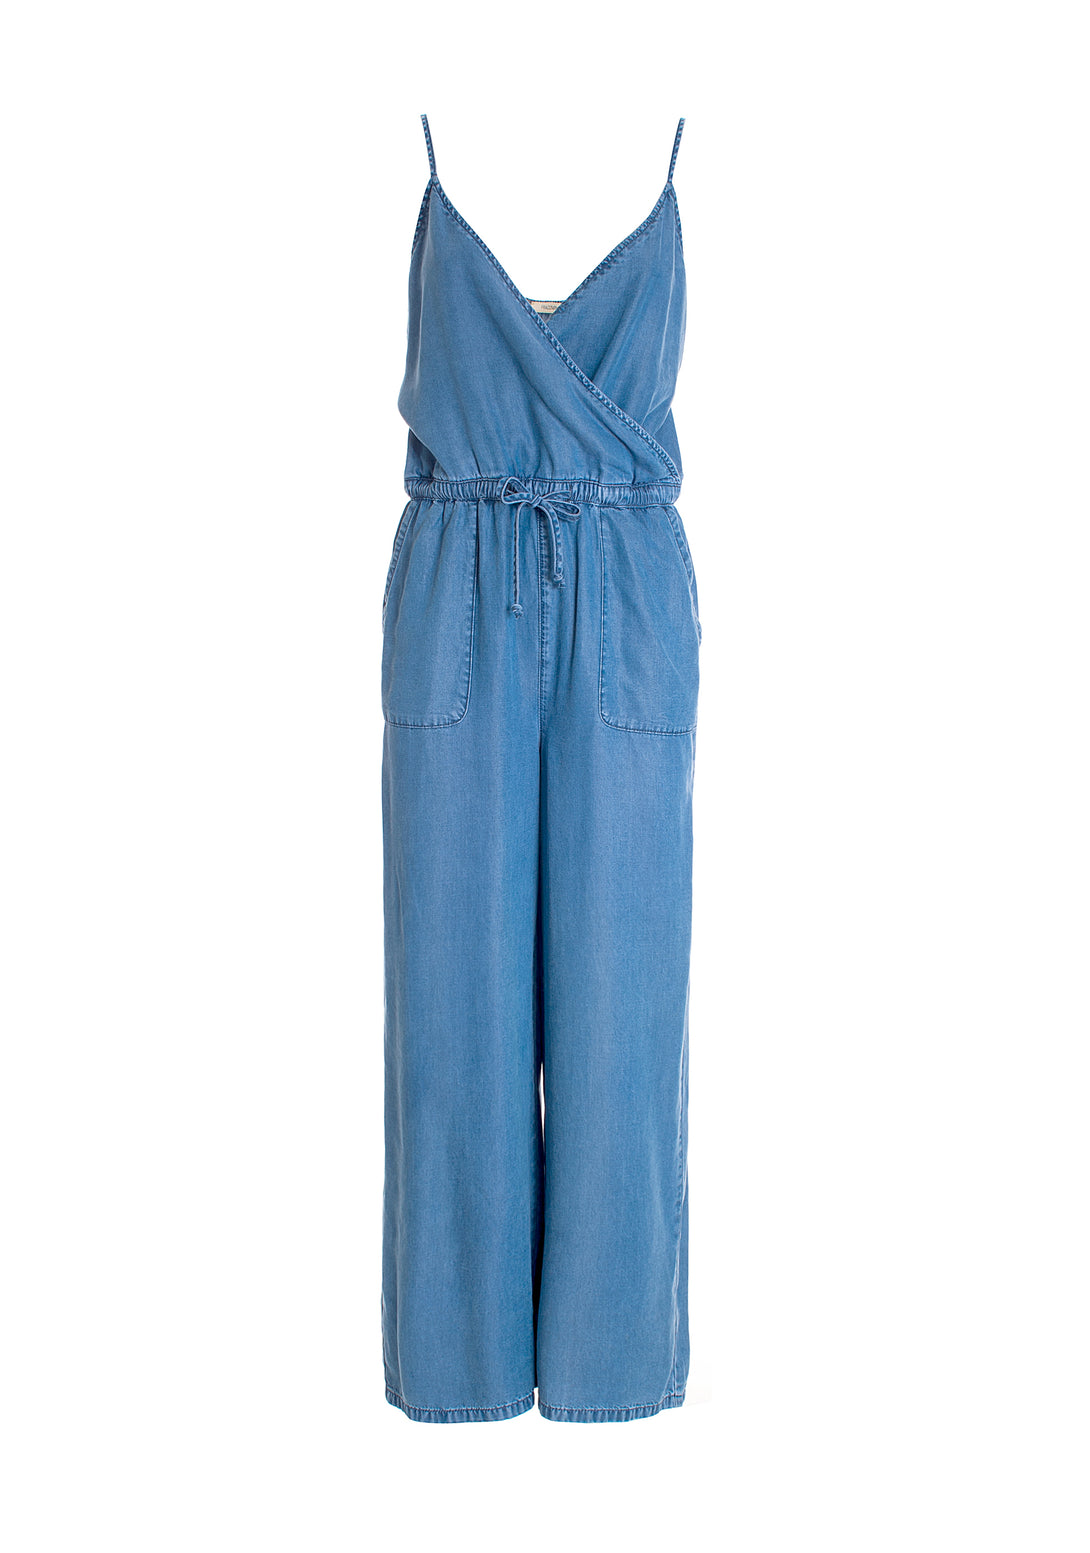 Jumpsuit regular fit made in chambray